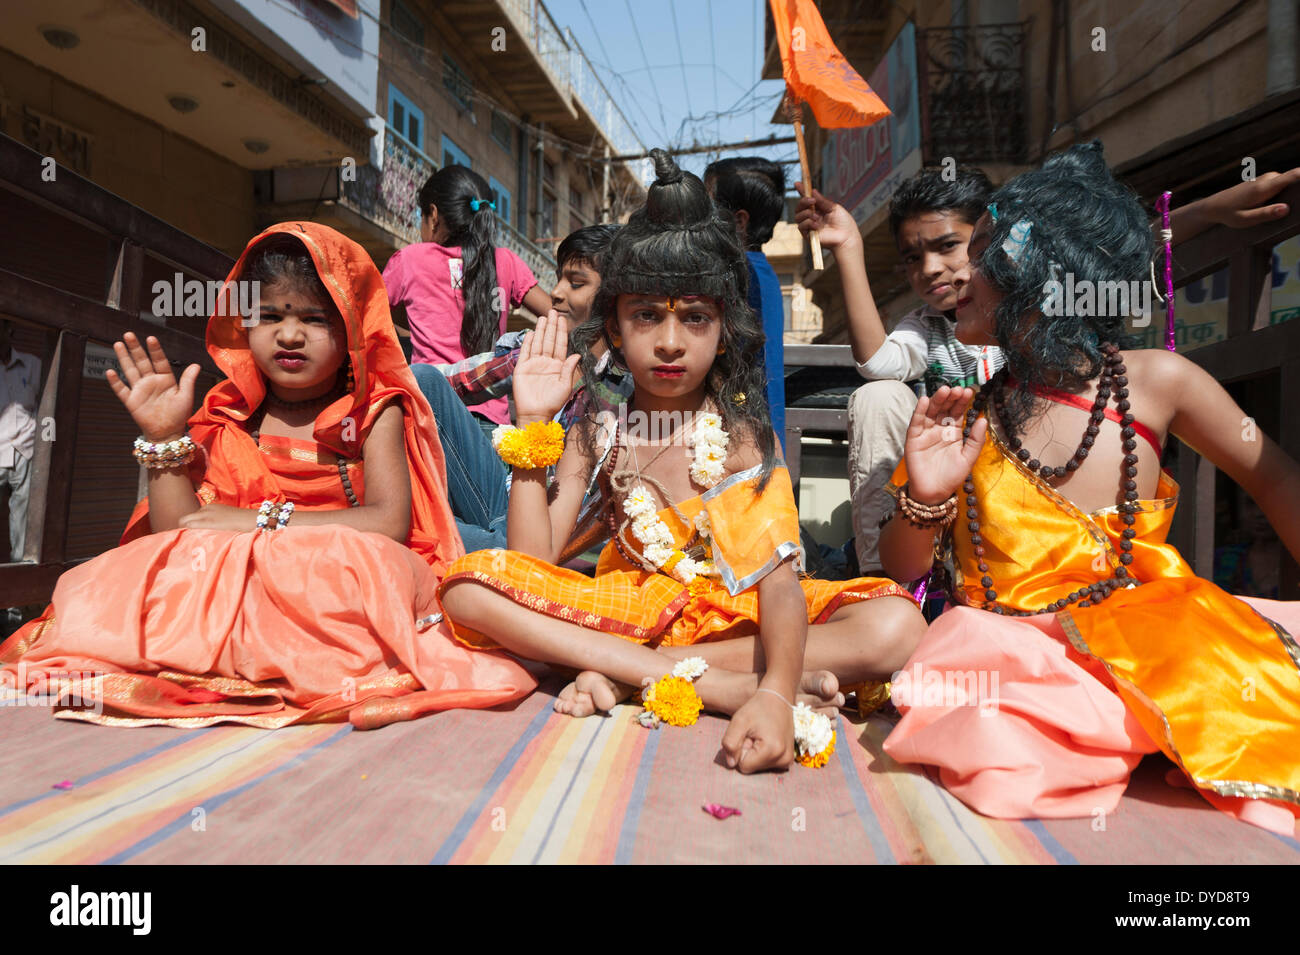 Jaisalmer, Rajasthan, India. 15th April, 2014. Children take part in the Hanuman Jayanti festival in the narrow streets of Jaisalmer, Rajasthan. The celebration occurs on the 15th day of the Shukla Paksha during the month of Chaitra in the Hindu calendar. Credit:  Lee Thomas/Alamy Live News Stock Photo